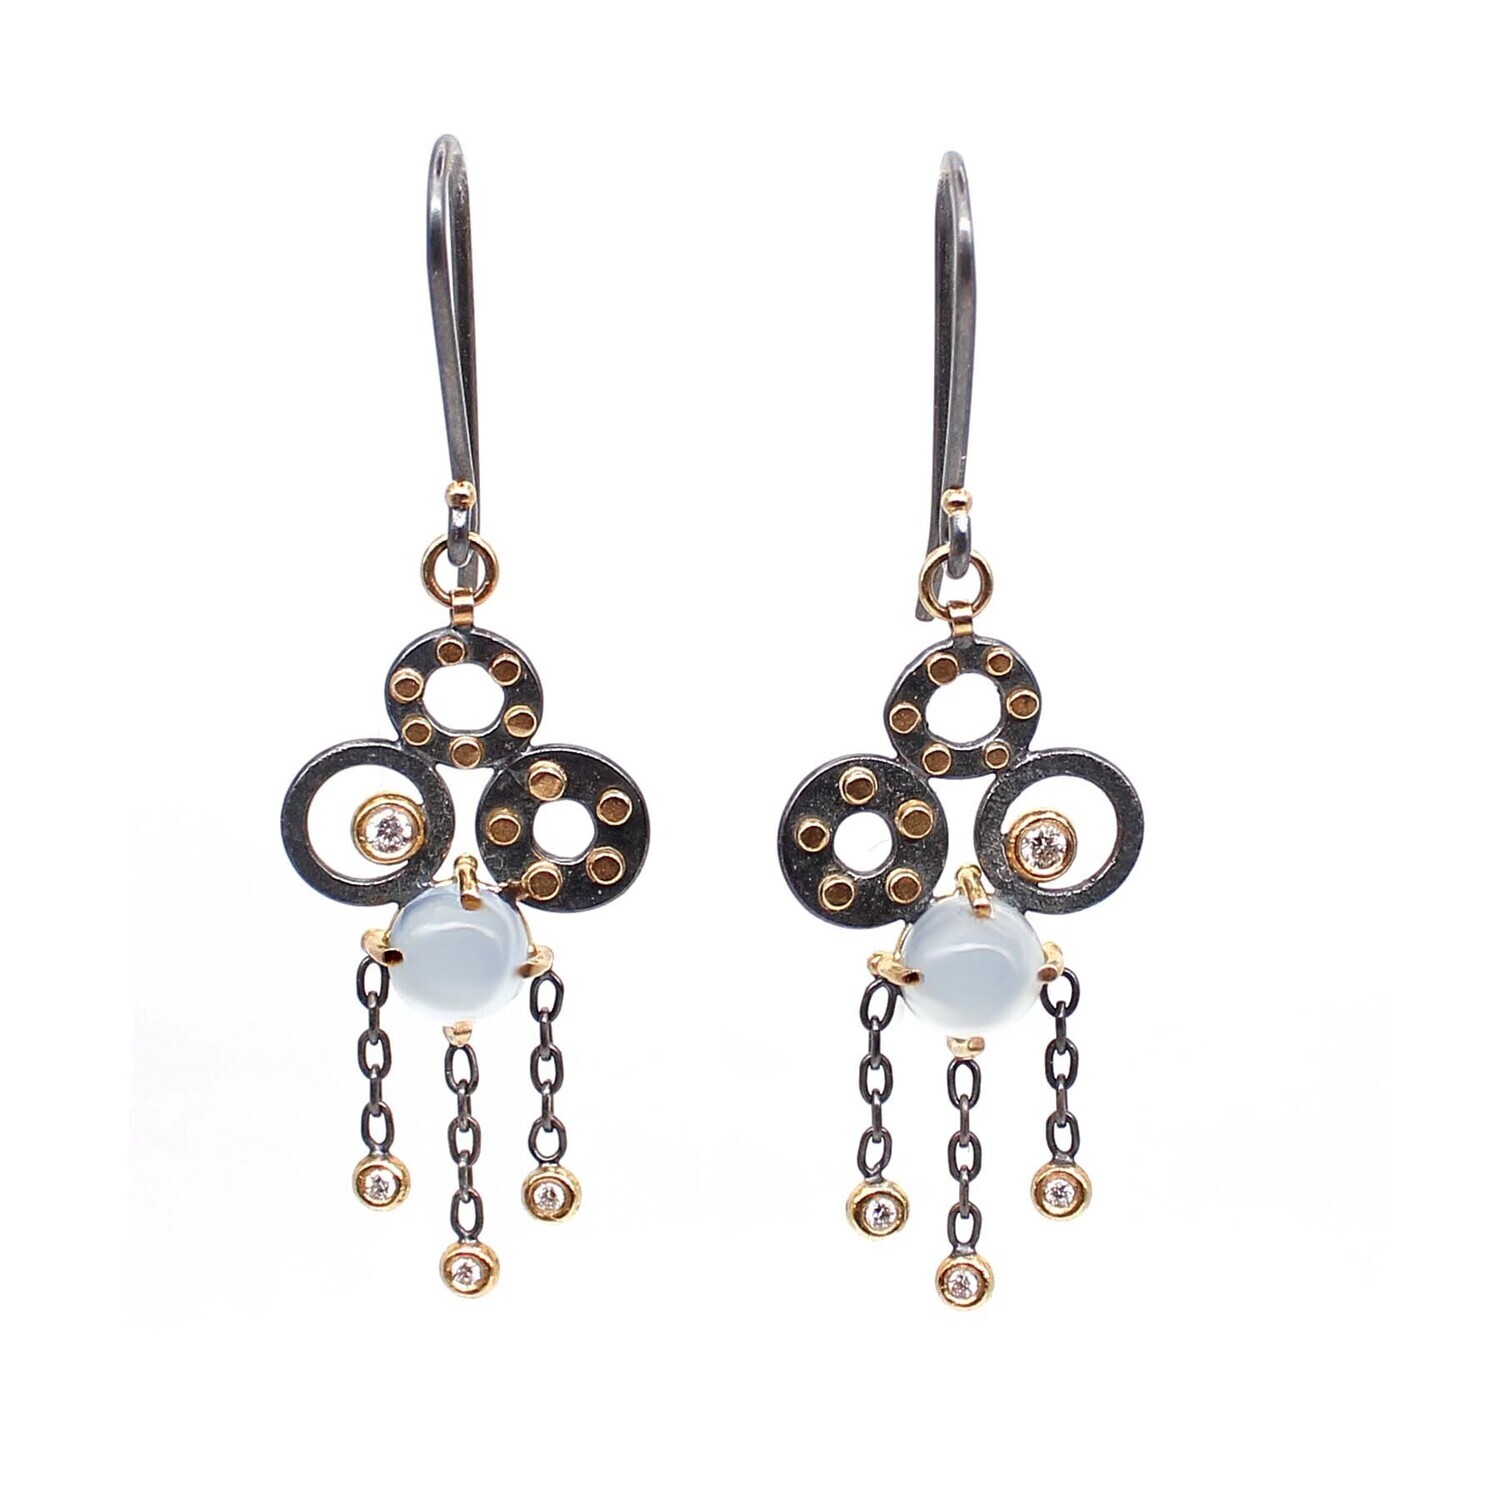 Joanna Gollberg: Circle And Chains Earrings